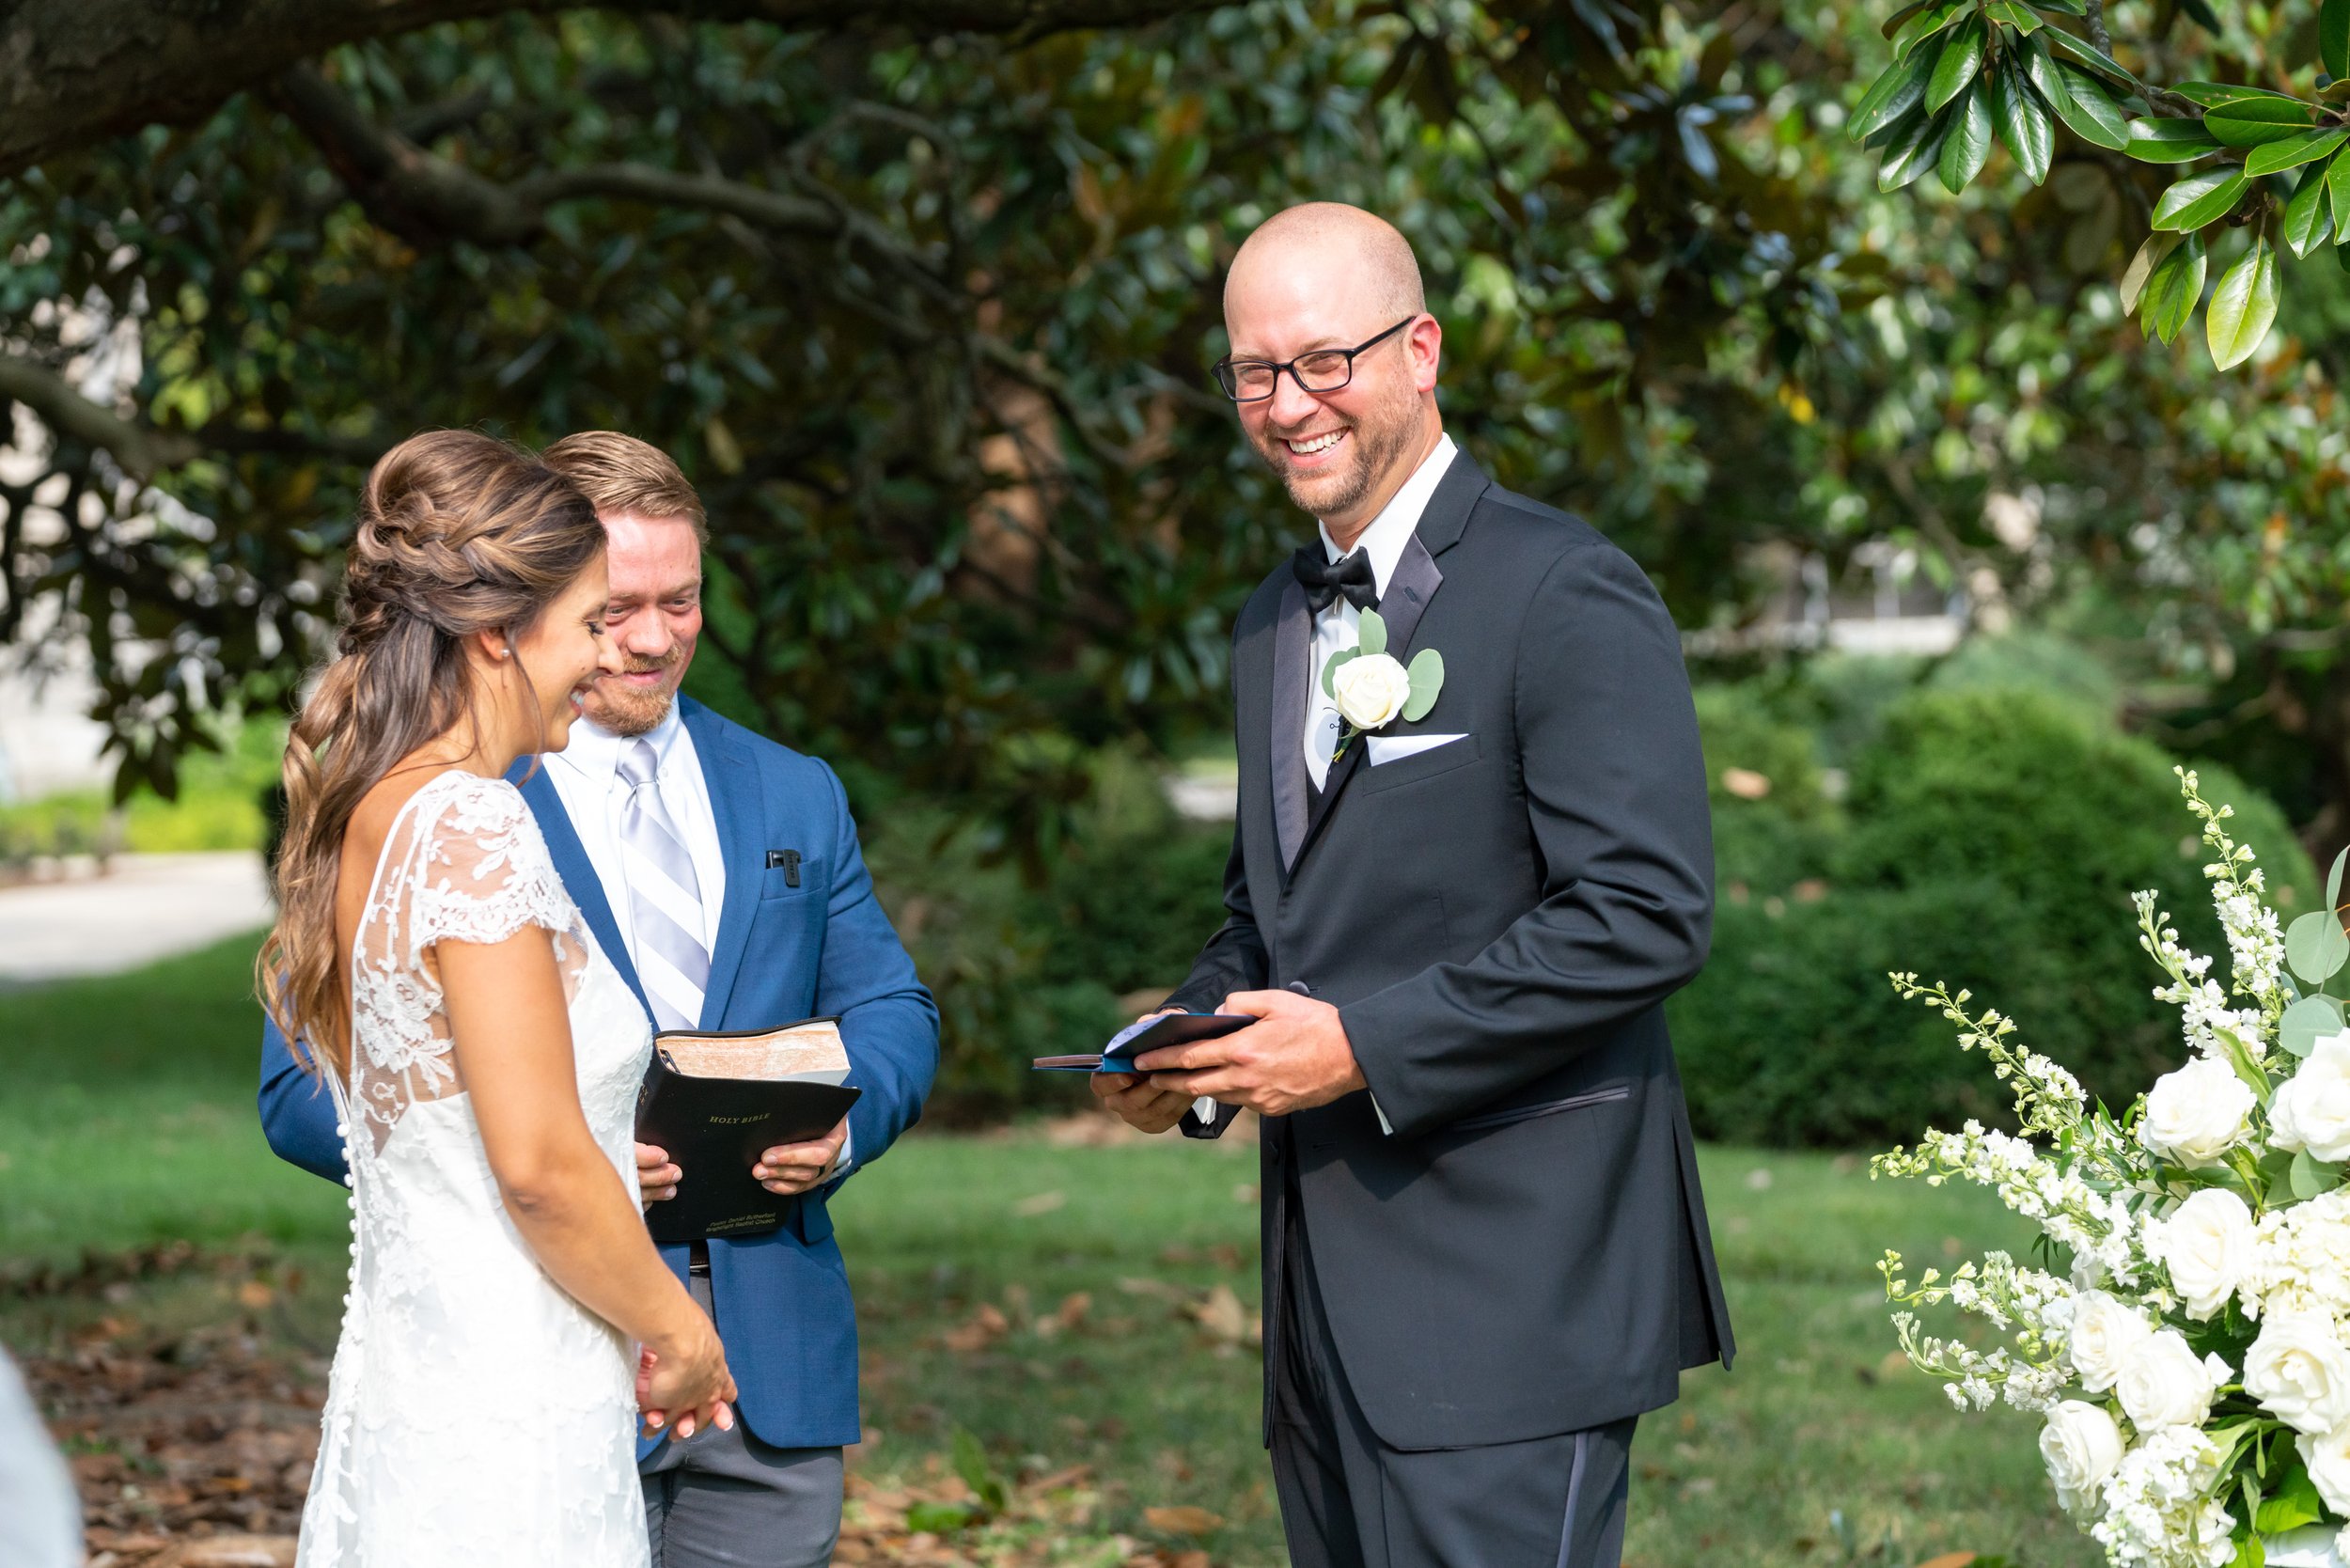 Groom laughs as he reads his vows to his bride at this fun wedding in DC